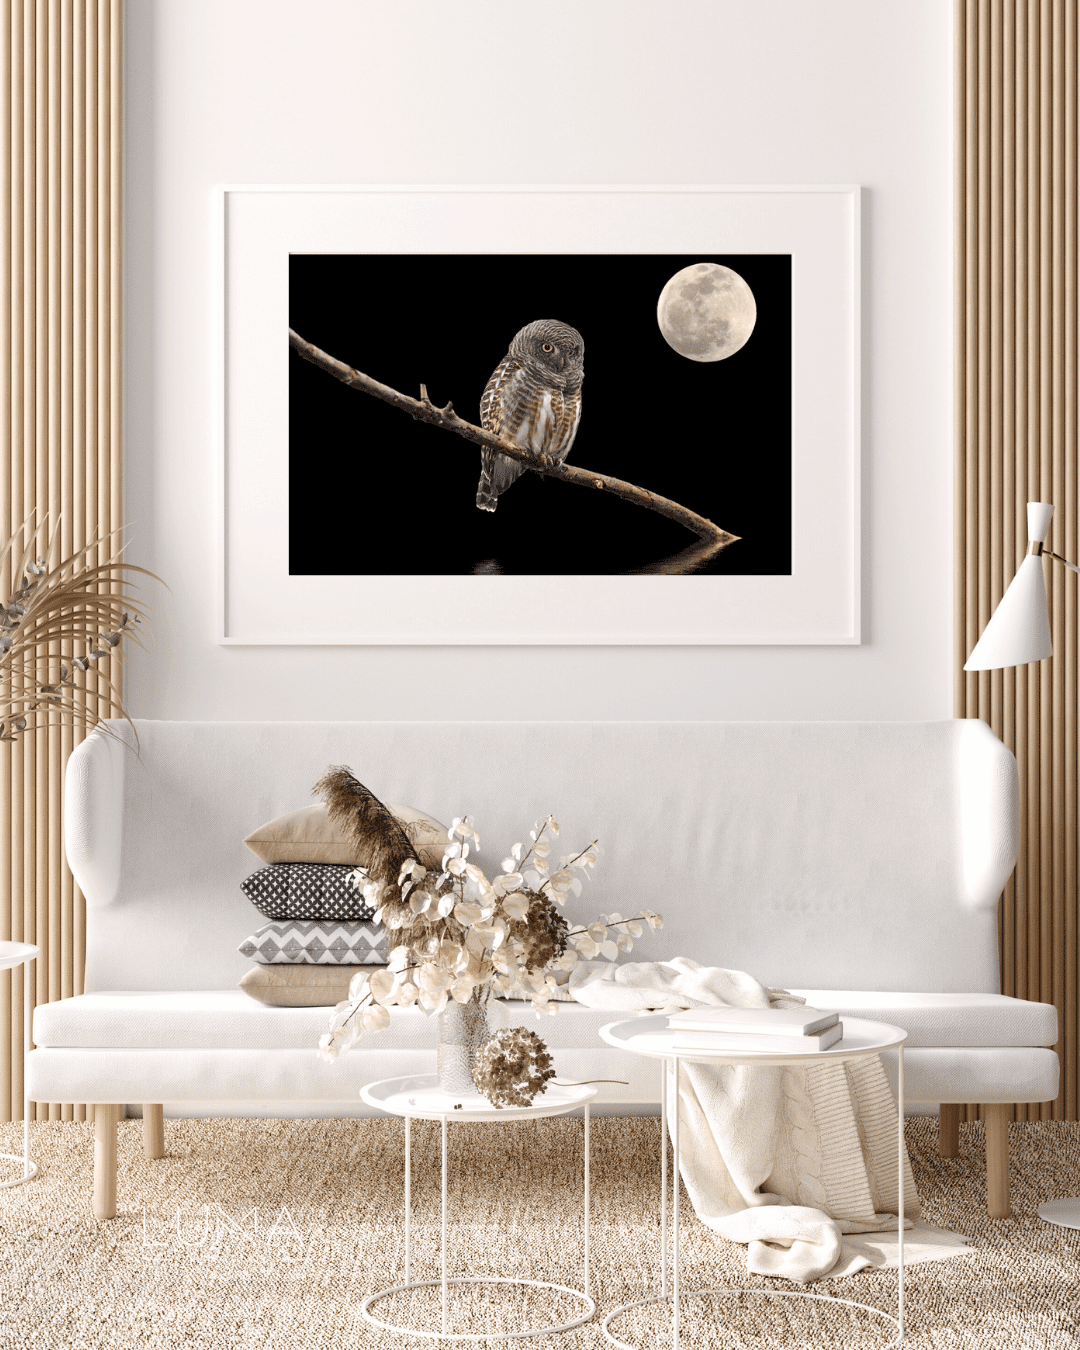 The Owl and The Moon Animal Artwork